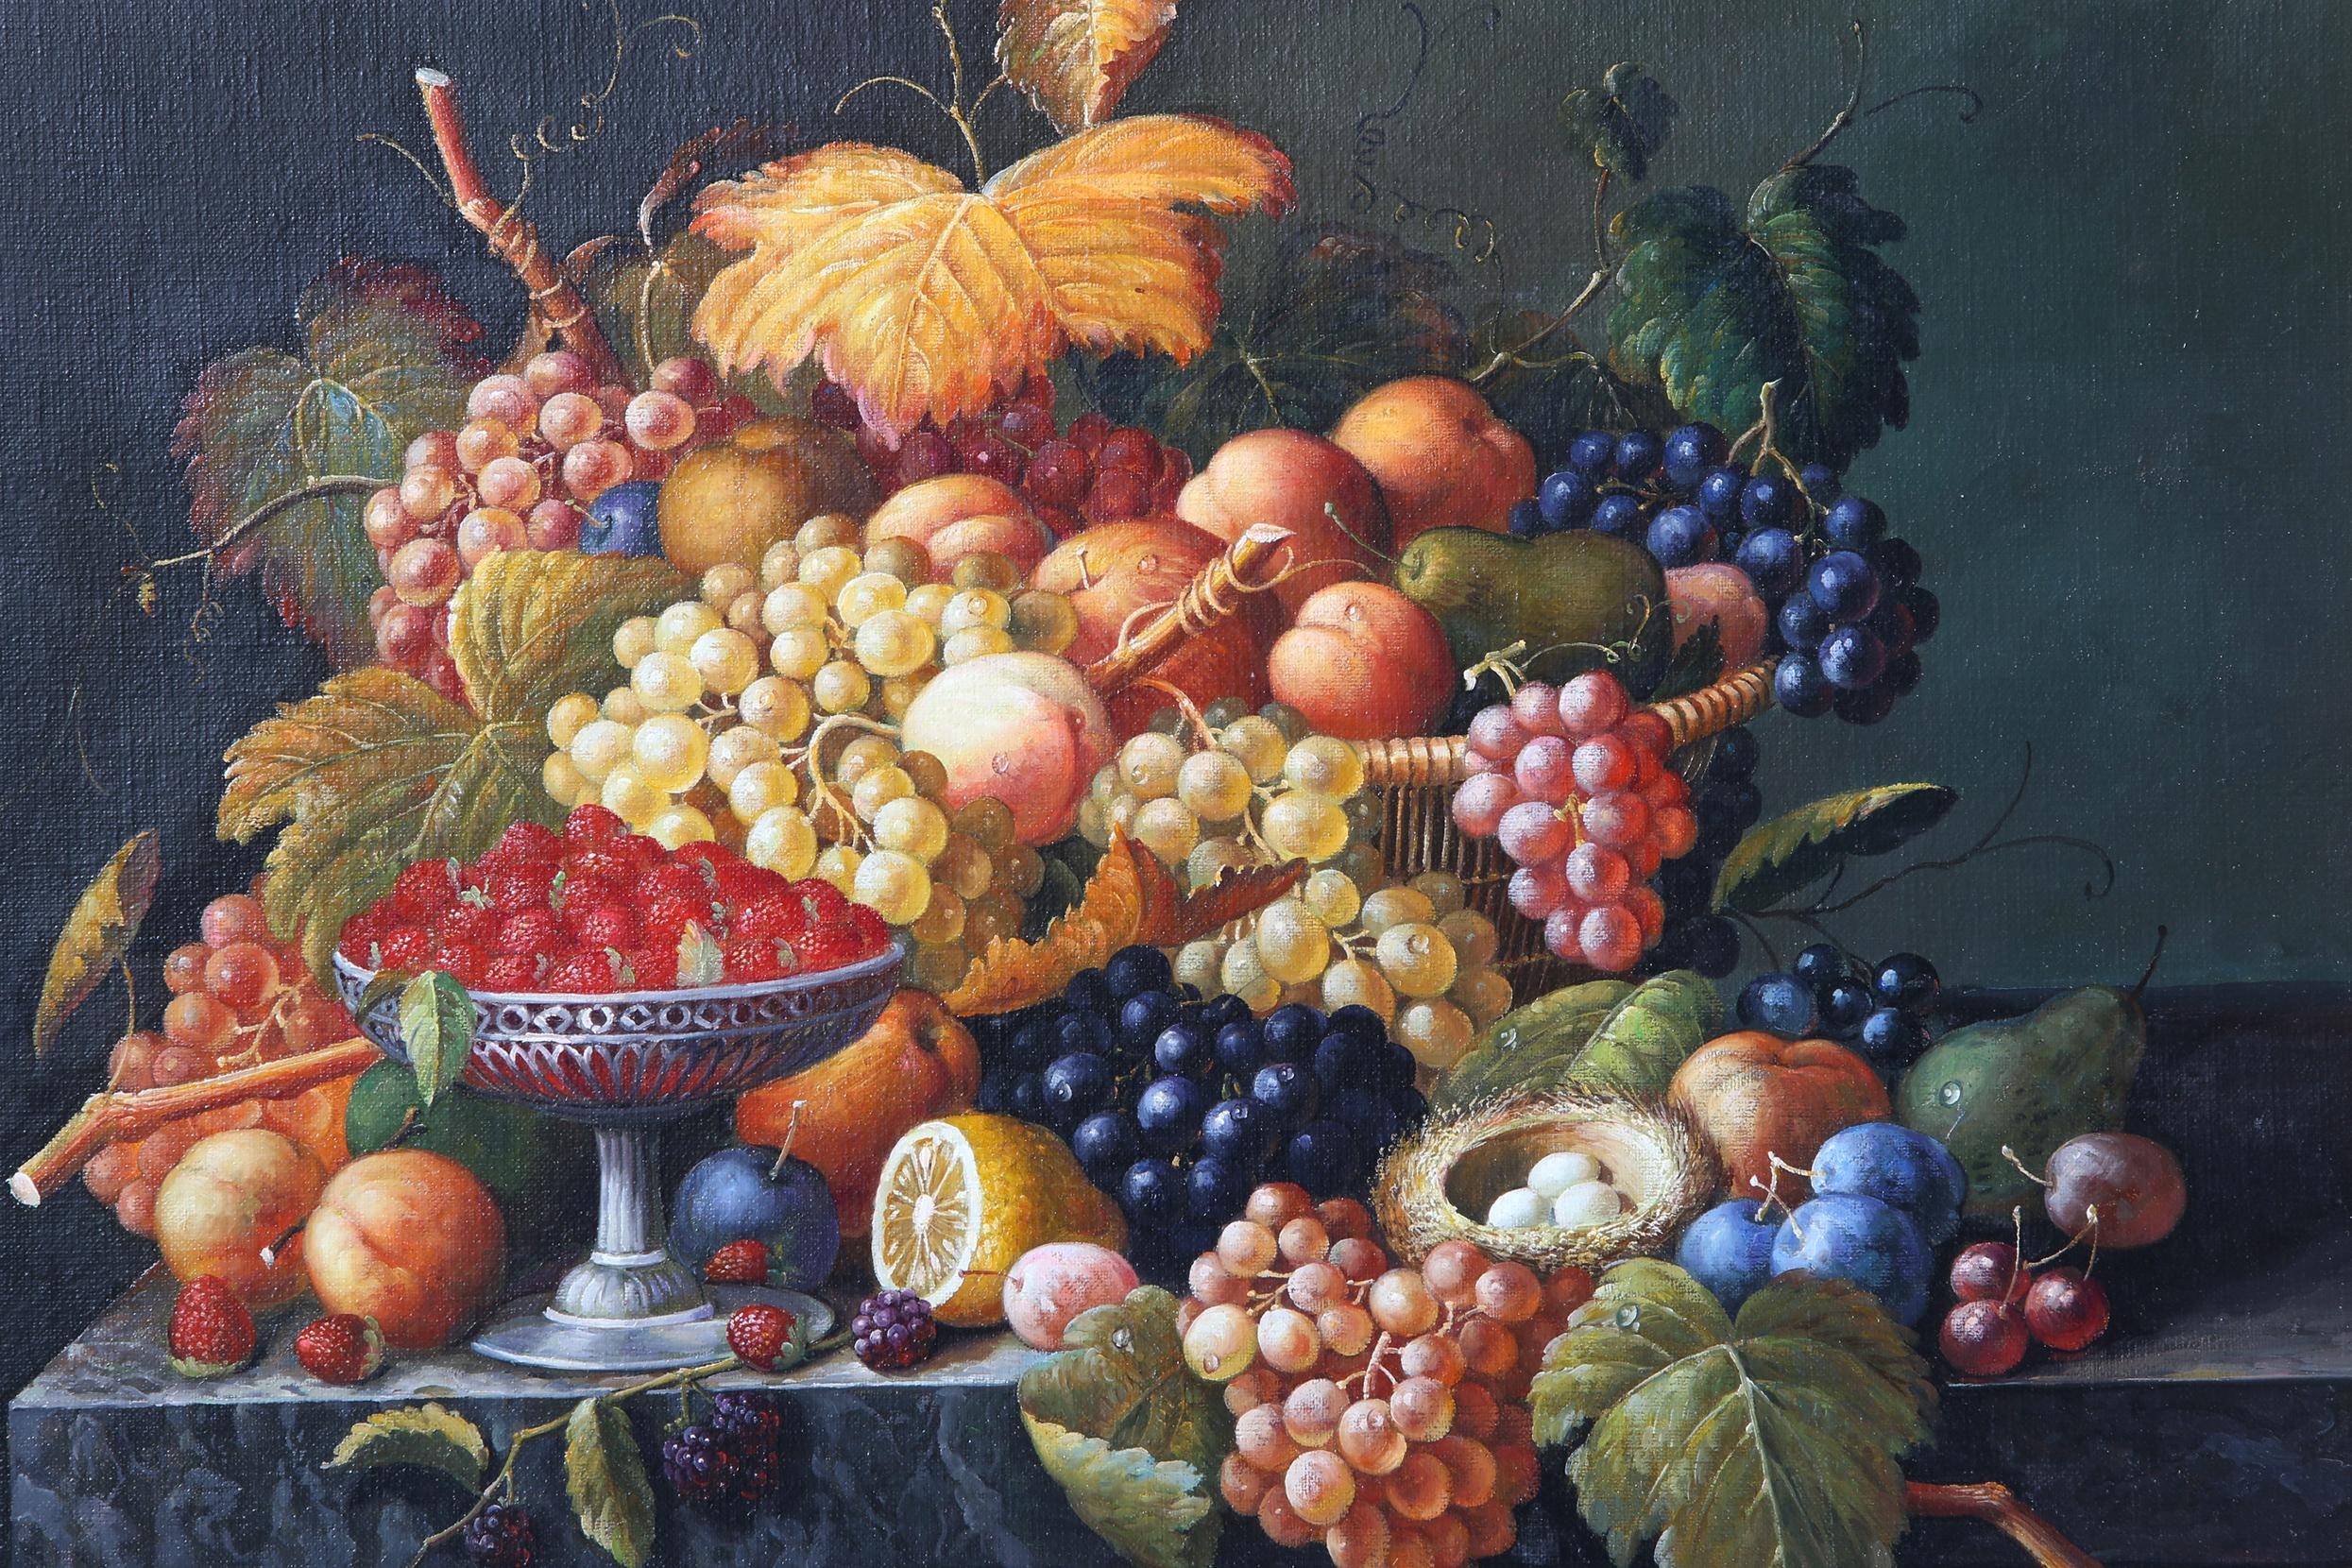 Large gilt wood framed oil on canvas 19th century style still life of fruit. The oil painting is in great condition with minor wear consistent with age / use. The gilt wood frame is about 38 inches wide x 32 inches high. The canvas is about 29